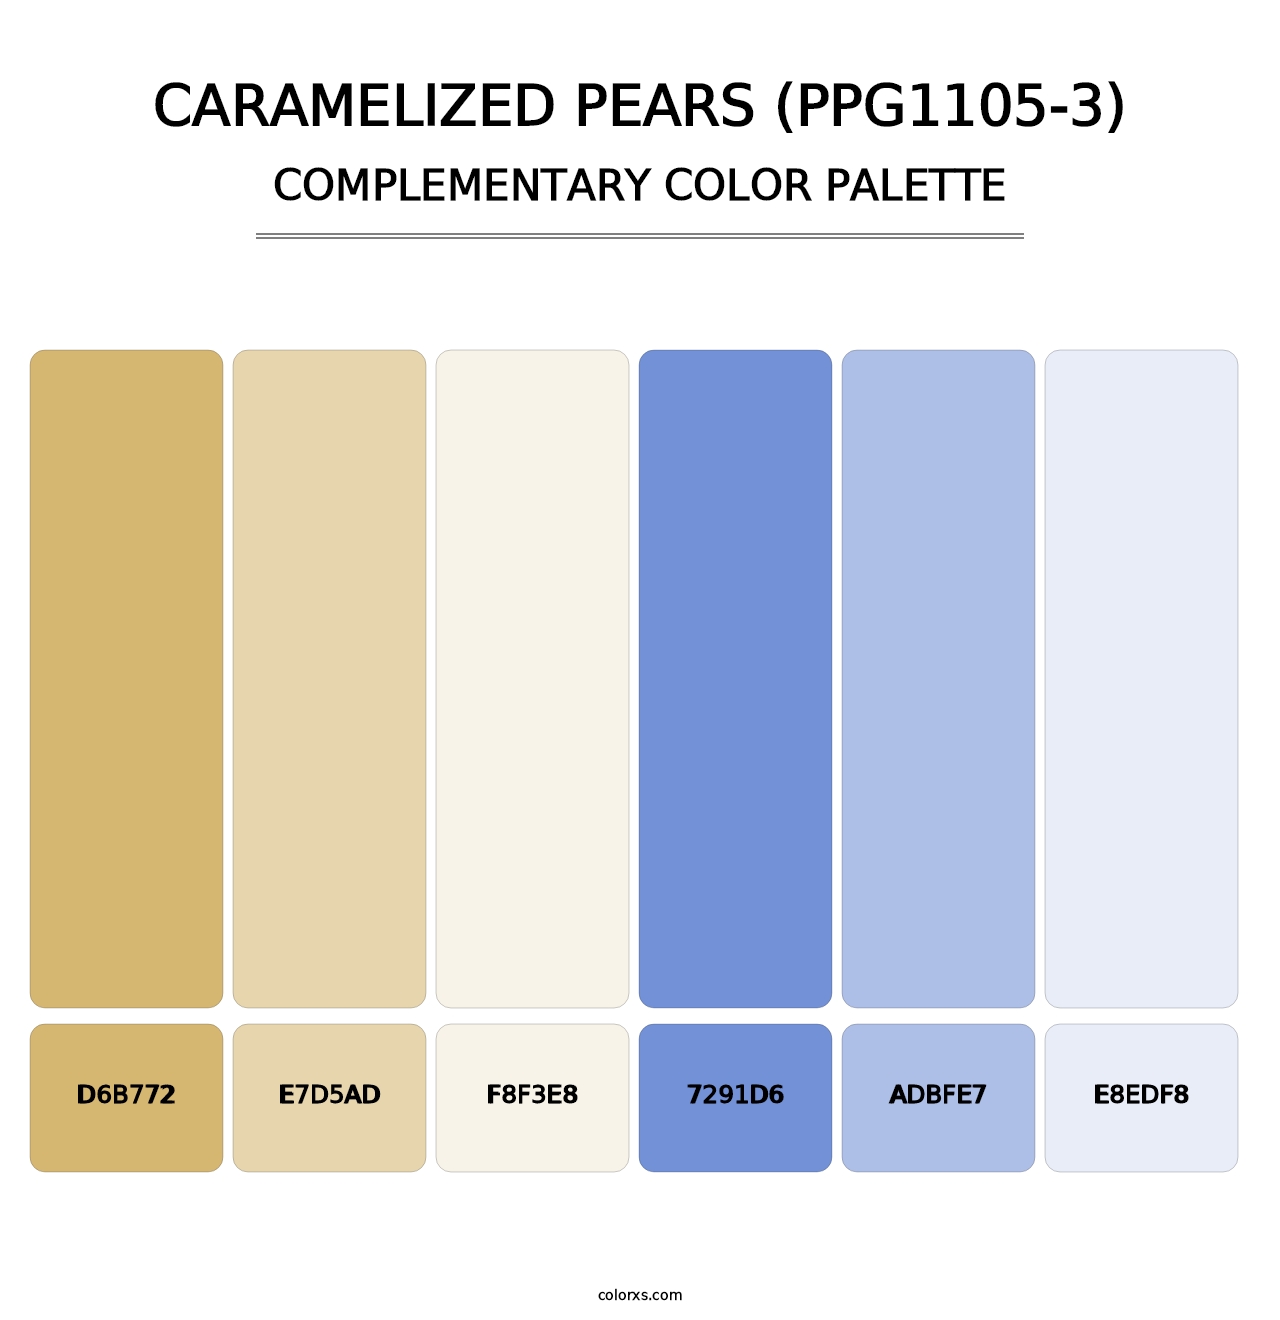 Caramelized Pears (PPG1105-3) - Complementary Color Palette